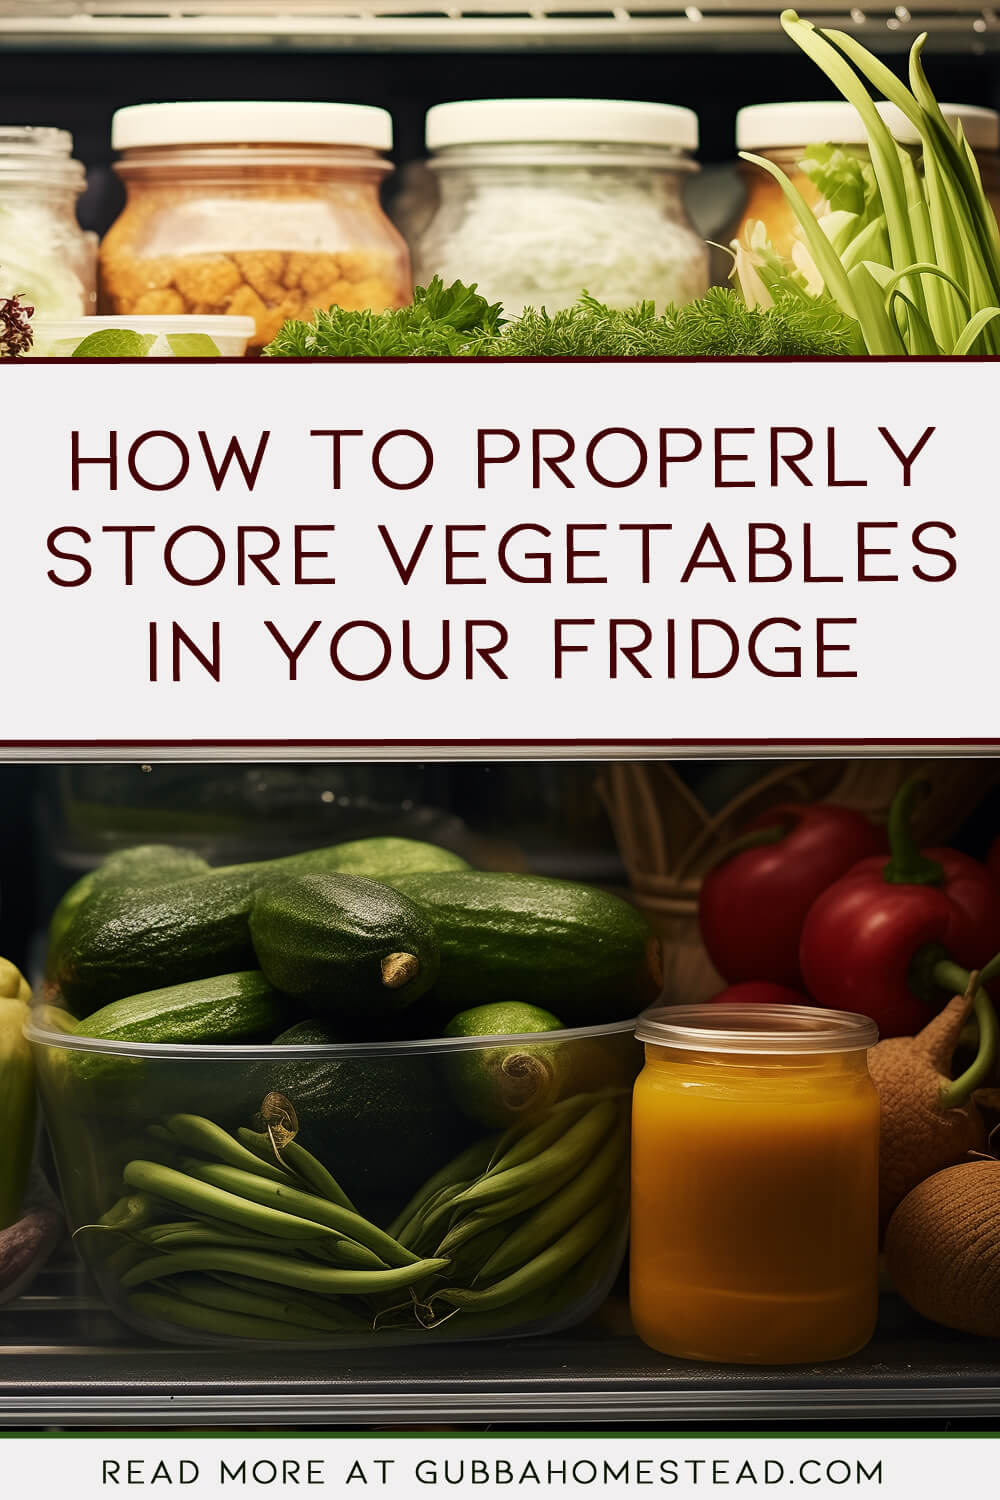 How to Properly Store Vegetables in Your Fridge